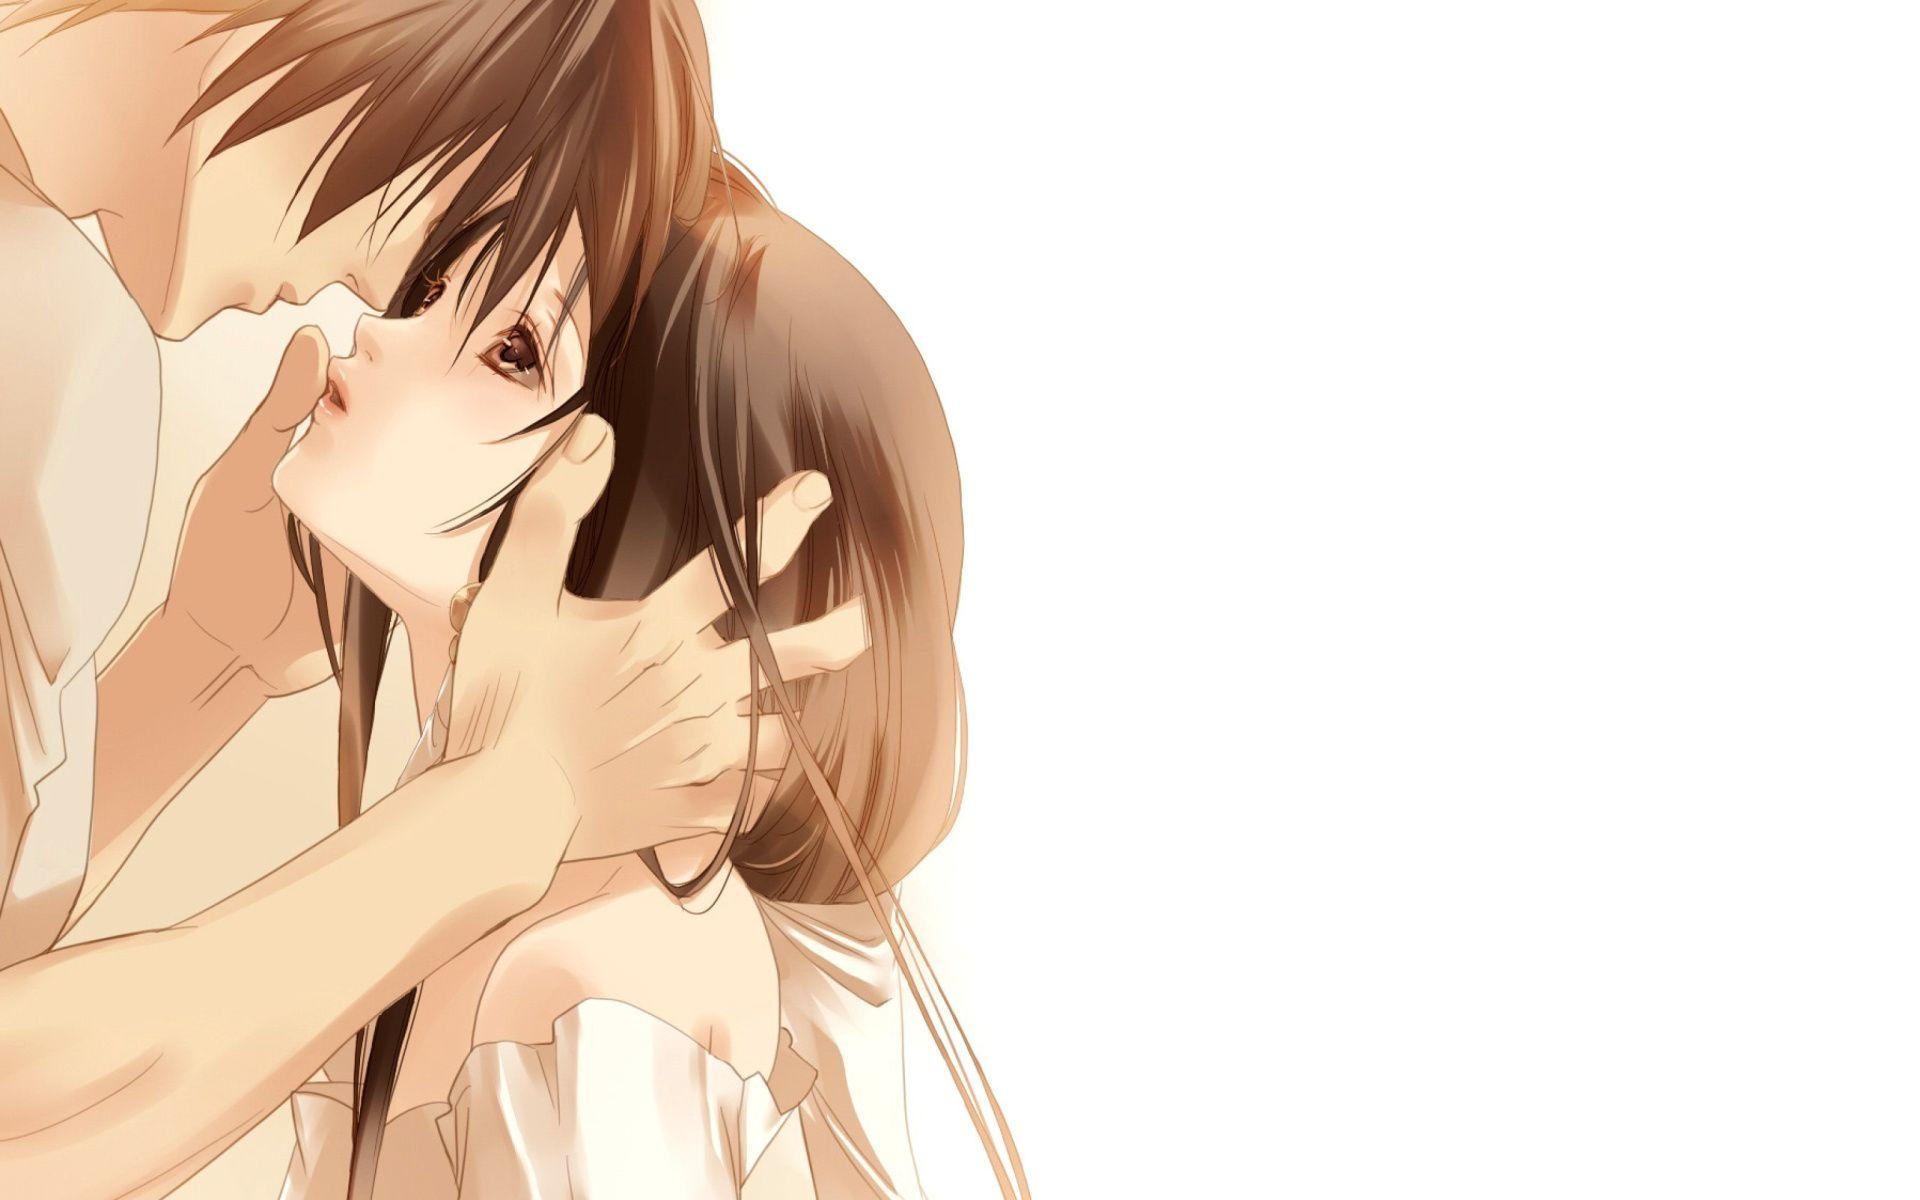 Anime Kissing Wallpapers Wallpaper Cave.